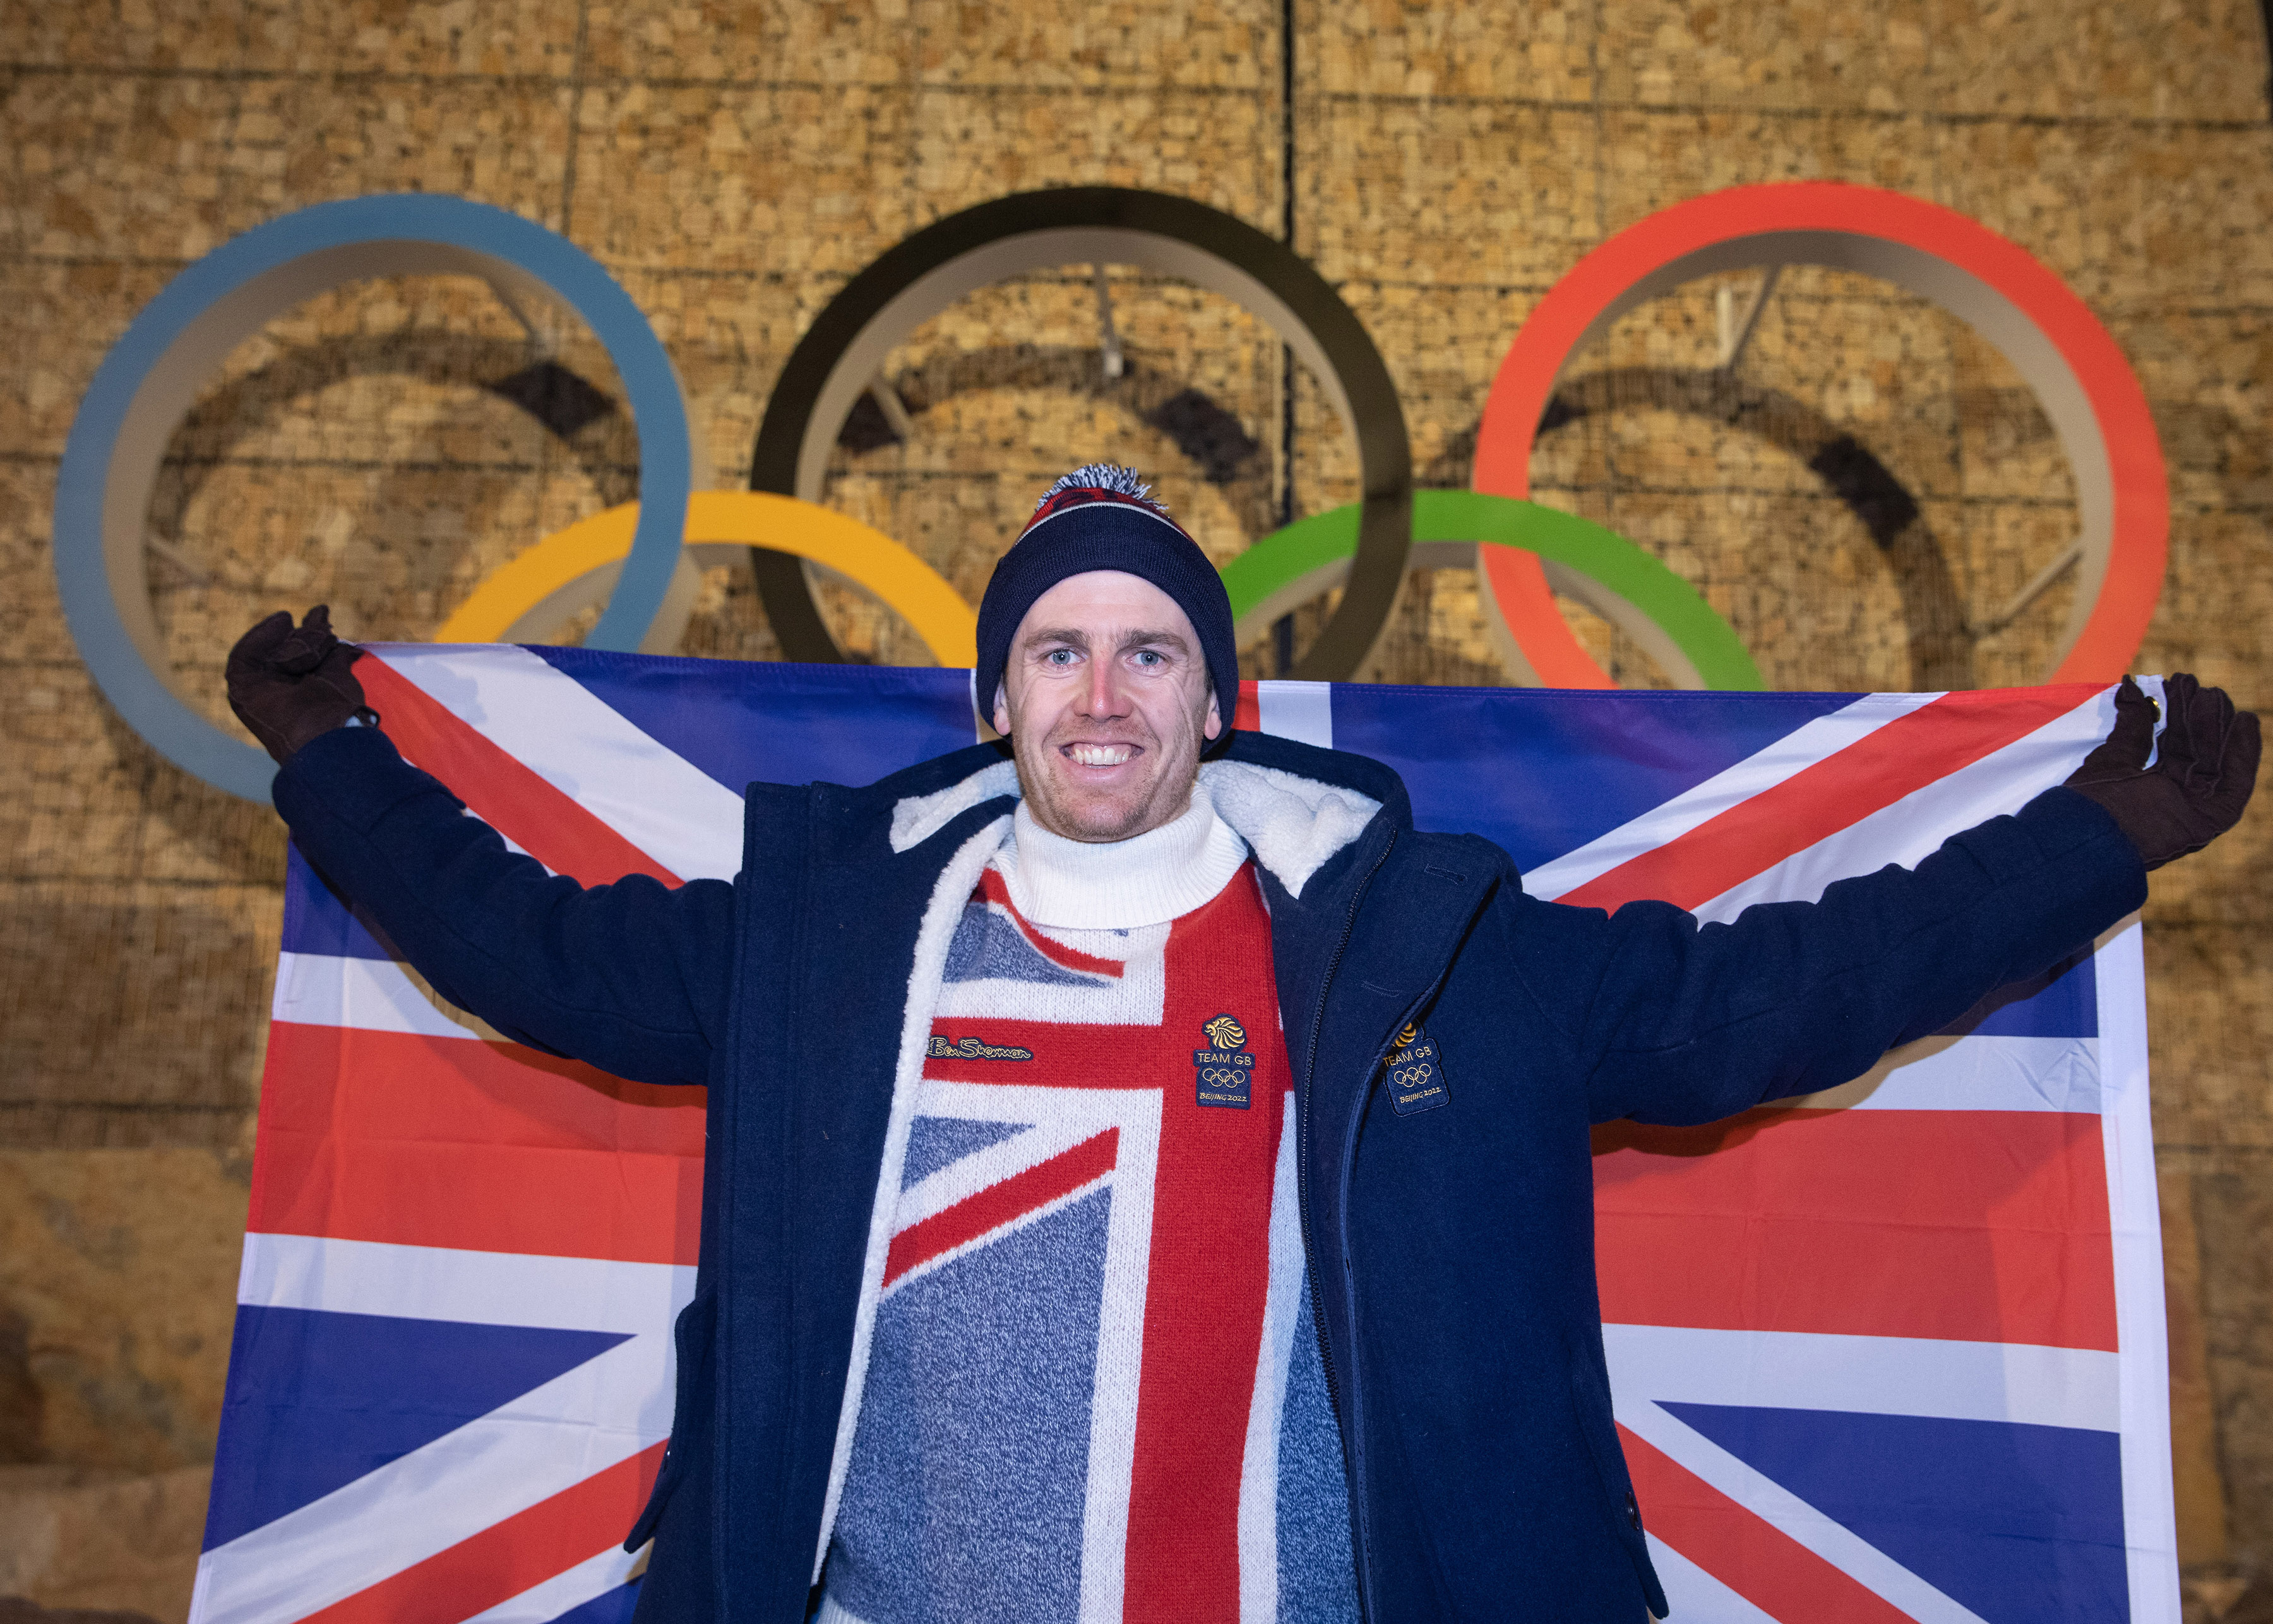 Dave Ryding has been selected as one of Great Britain's flag bearers 